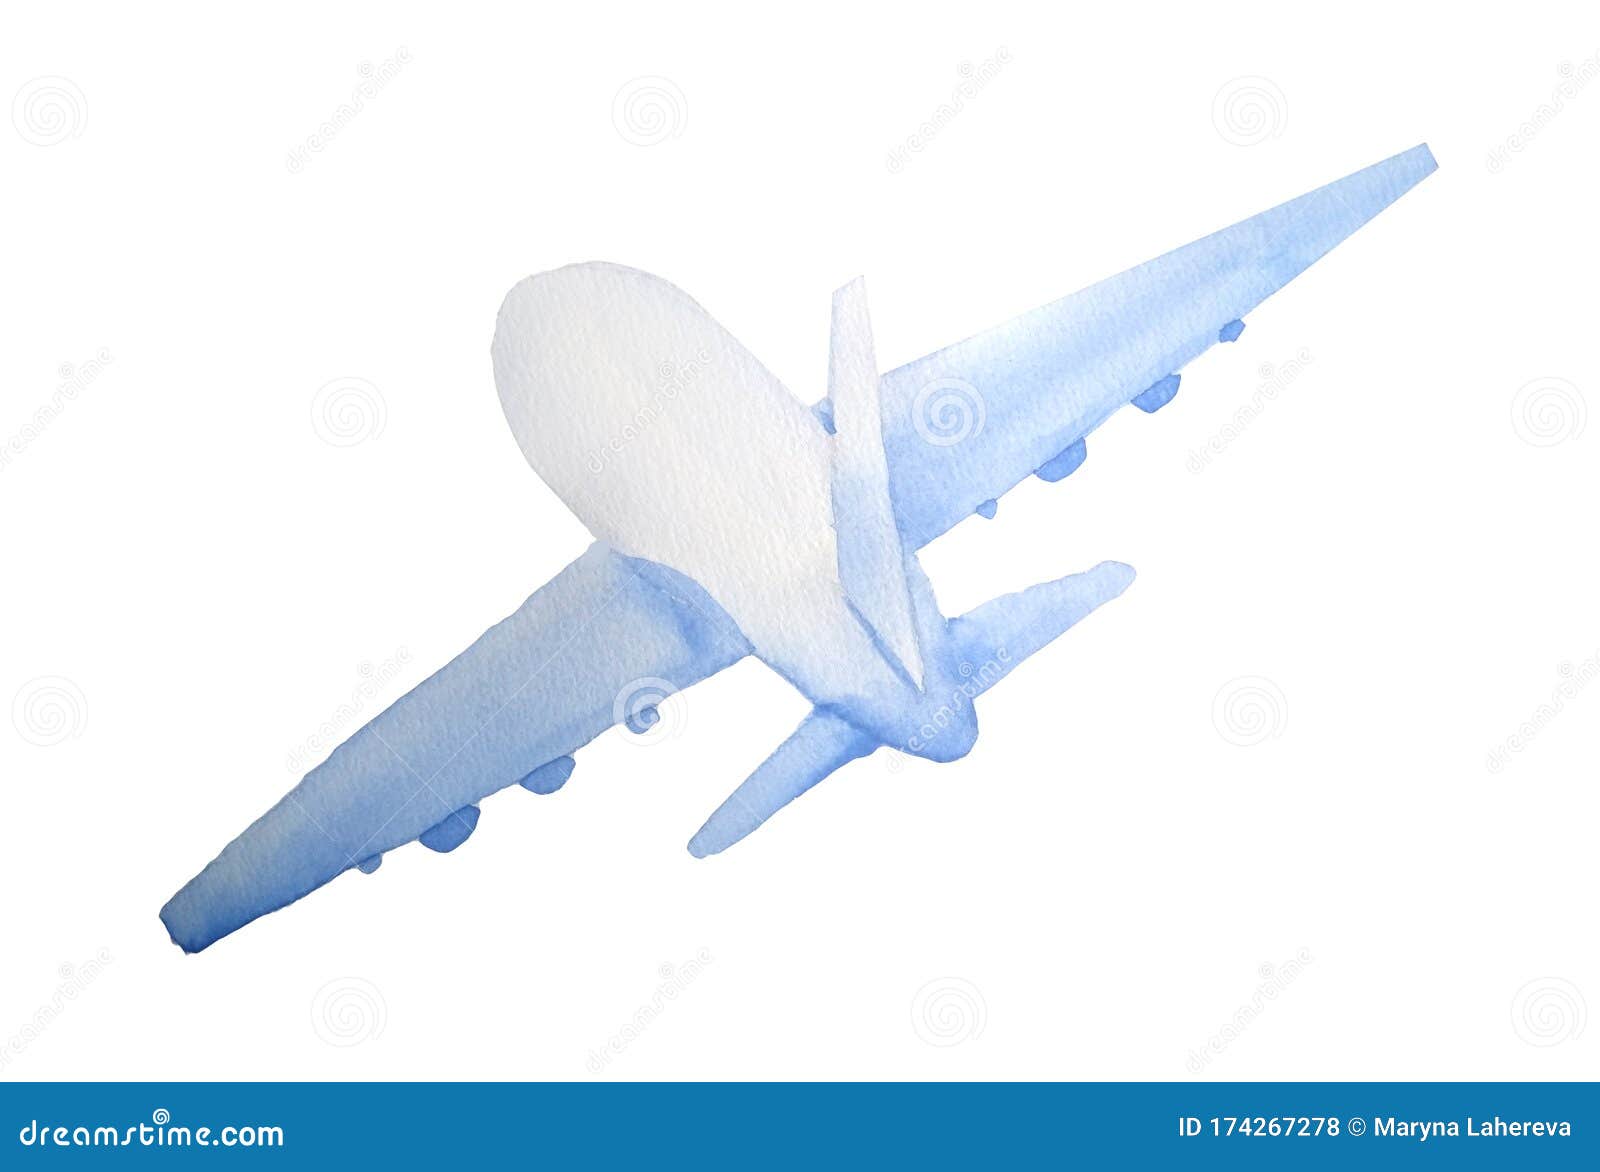 Watercolor Hand Drawn Illustration of Passenger Airplane Aircraft Plane in  Blue Colors. for Tourism Trip Journey Flight Stock Illustration -  Illustration of design, machine: 174267278